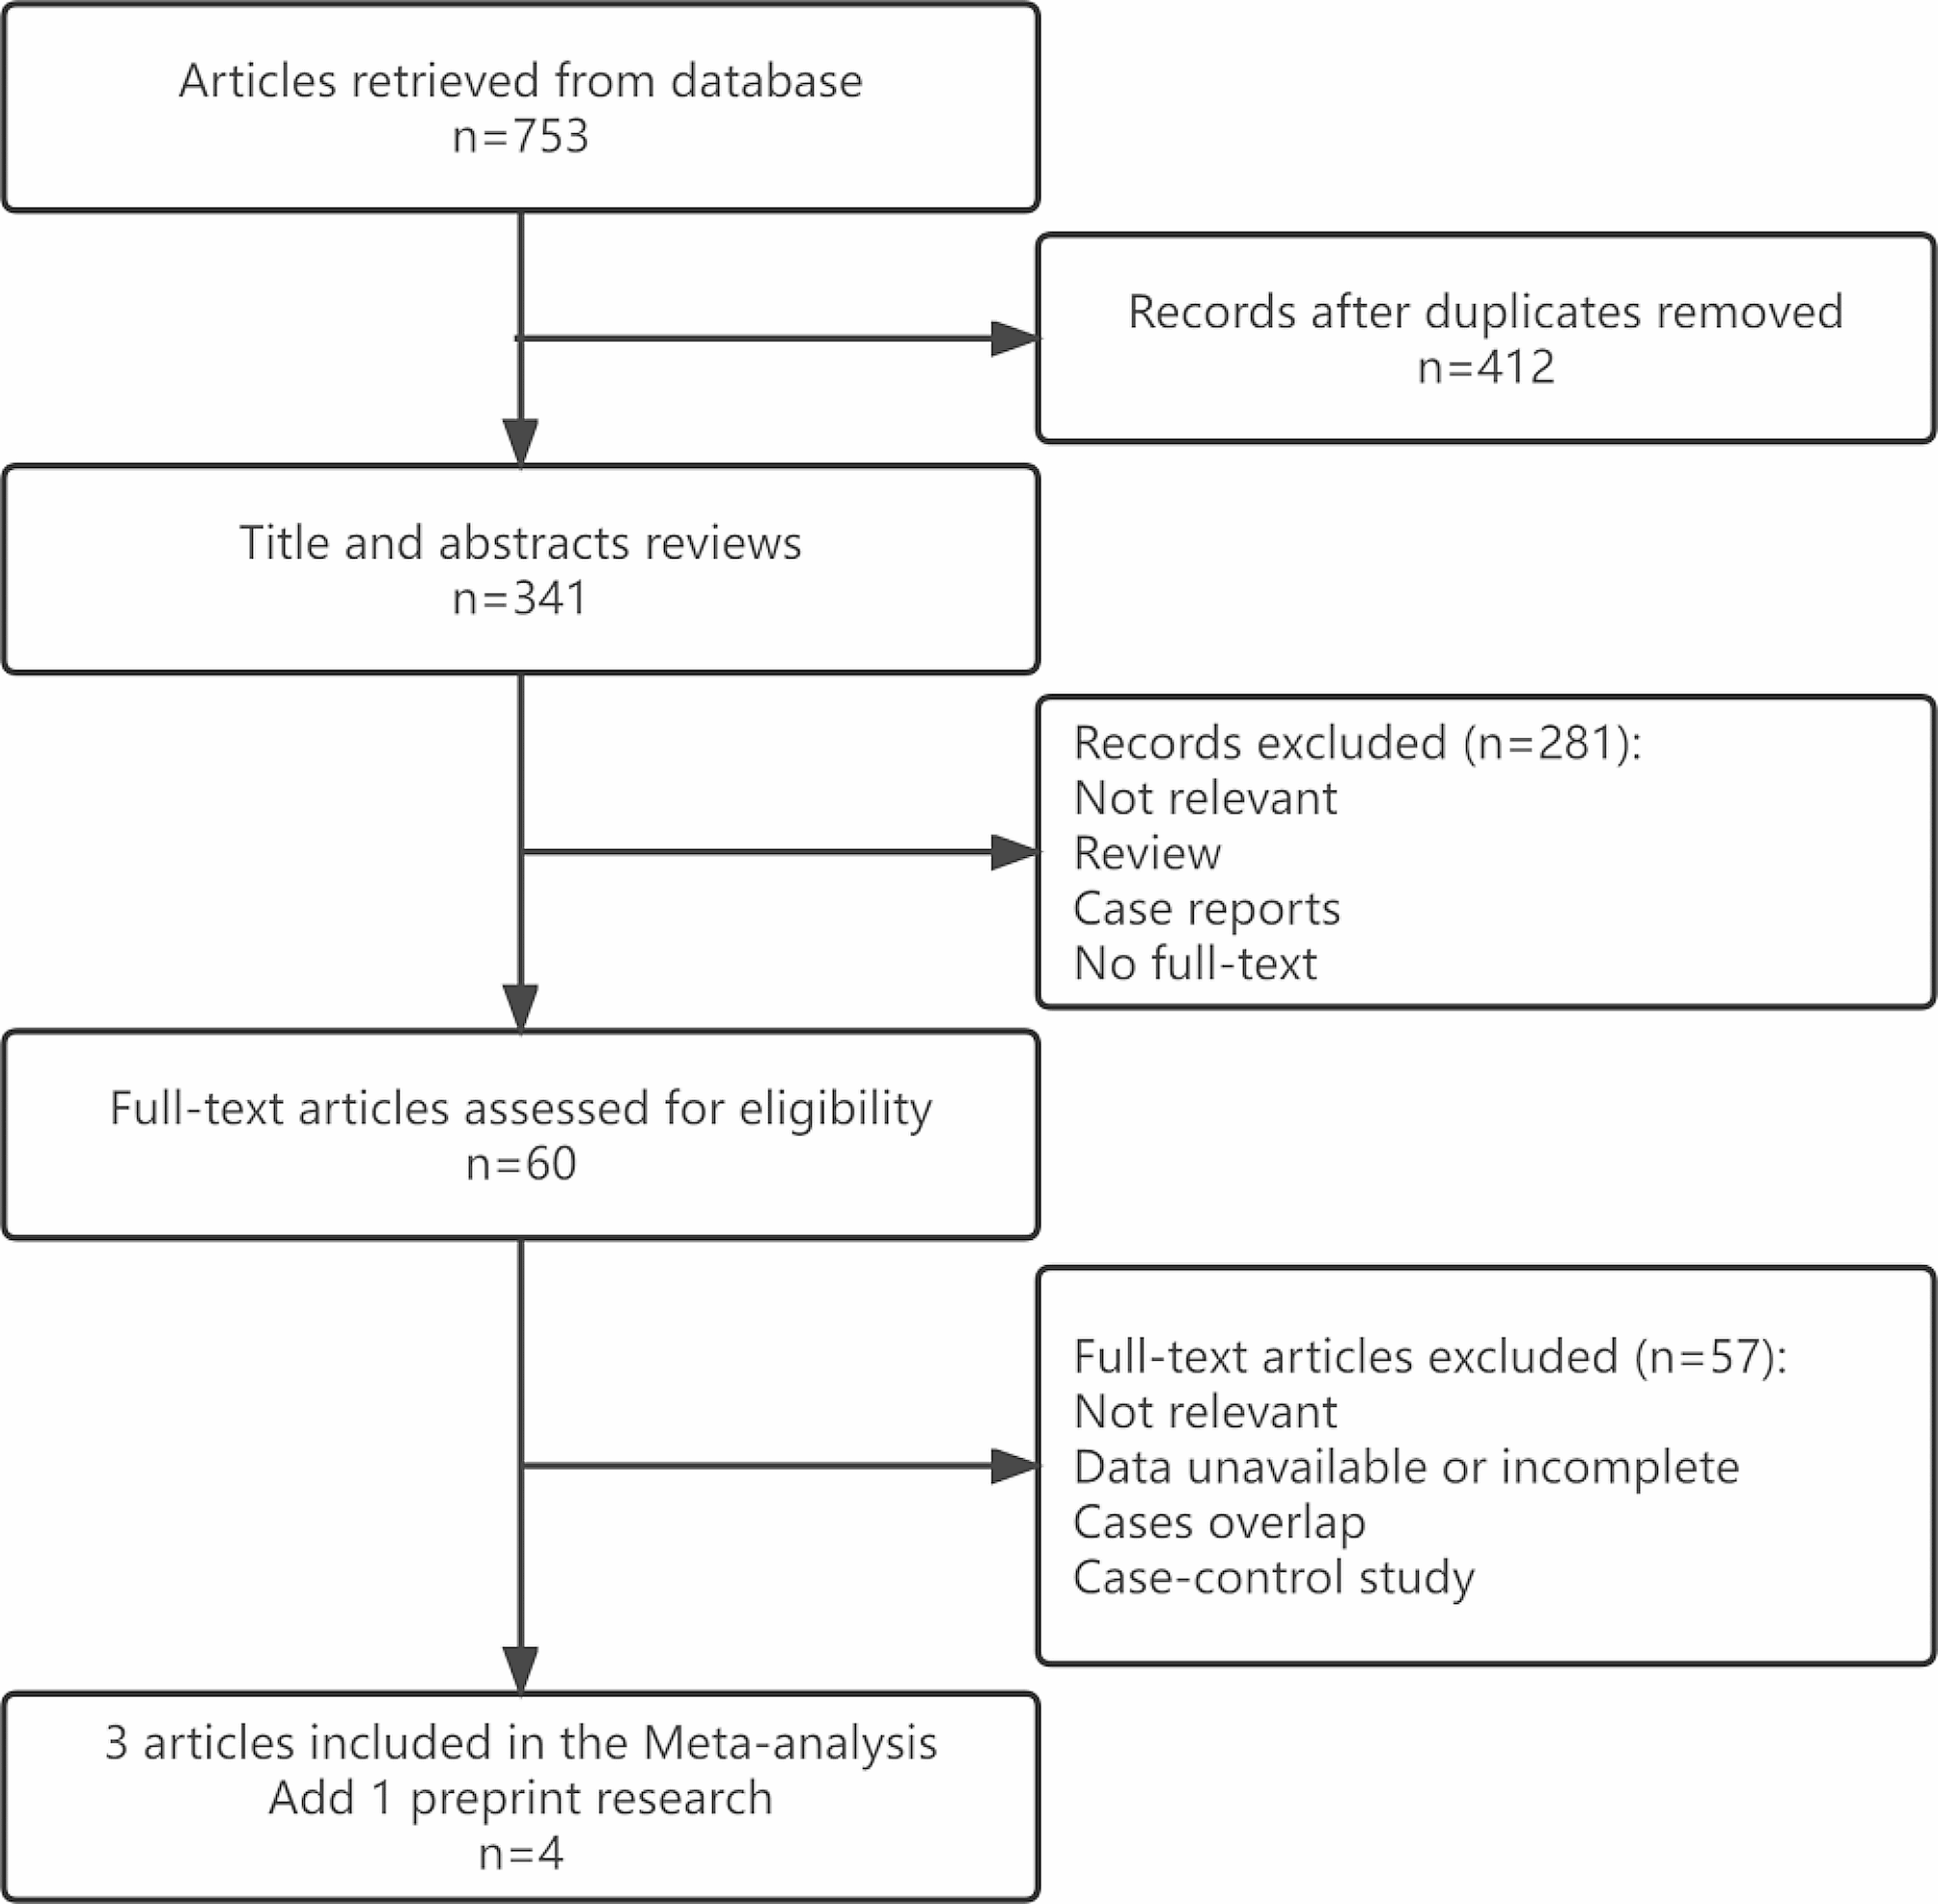 C-reactive protein to albumin ratio as a prognostic tool for predicting intravenous immunoglobulin resistance in children with kawasaki disease: a systematic review of cohort studies